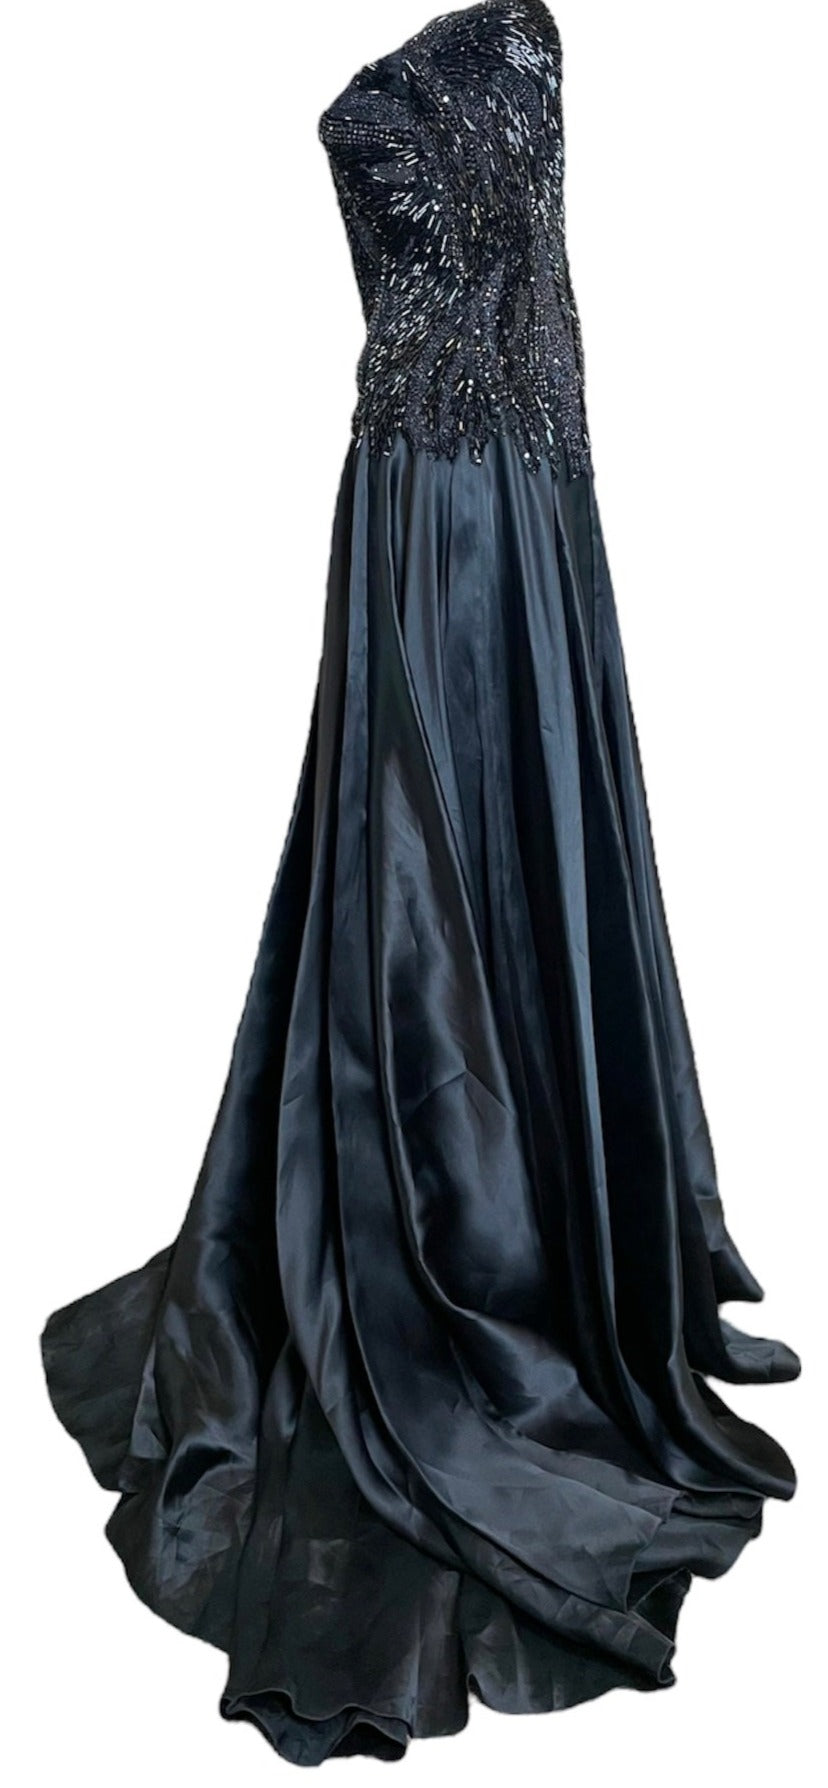  Lorena Sarbu Black Satin  Gown with Heavily Beaded Bodice SIDE 2 of 5